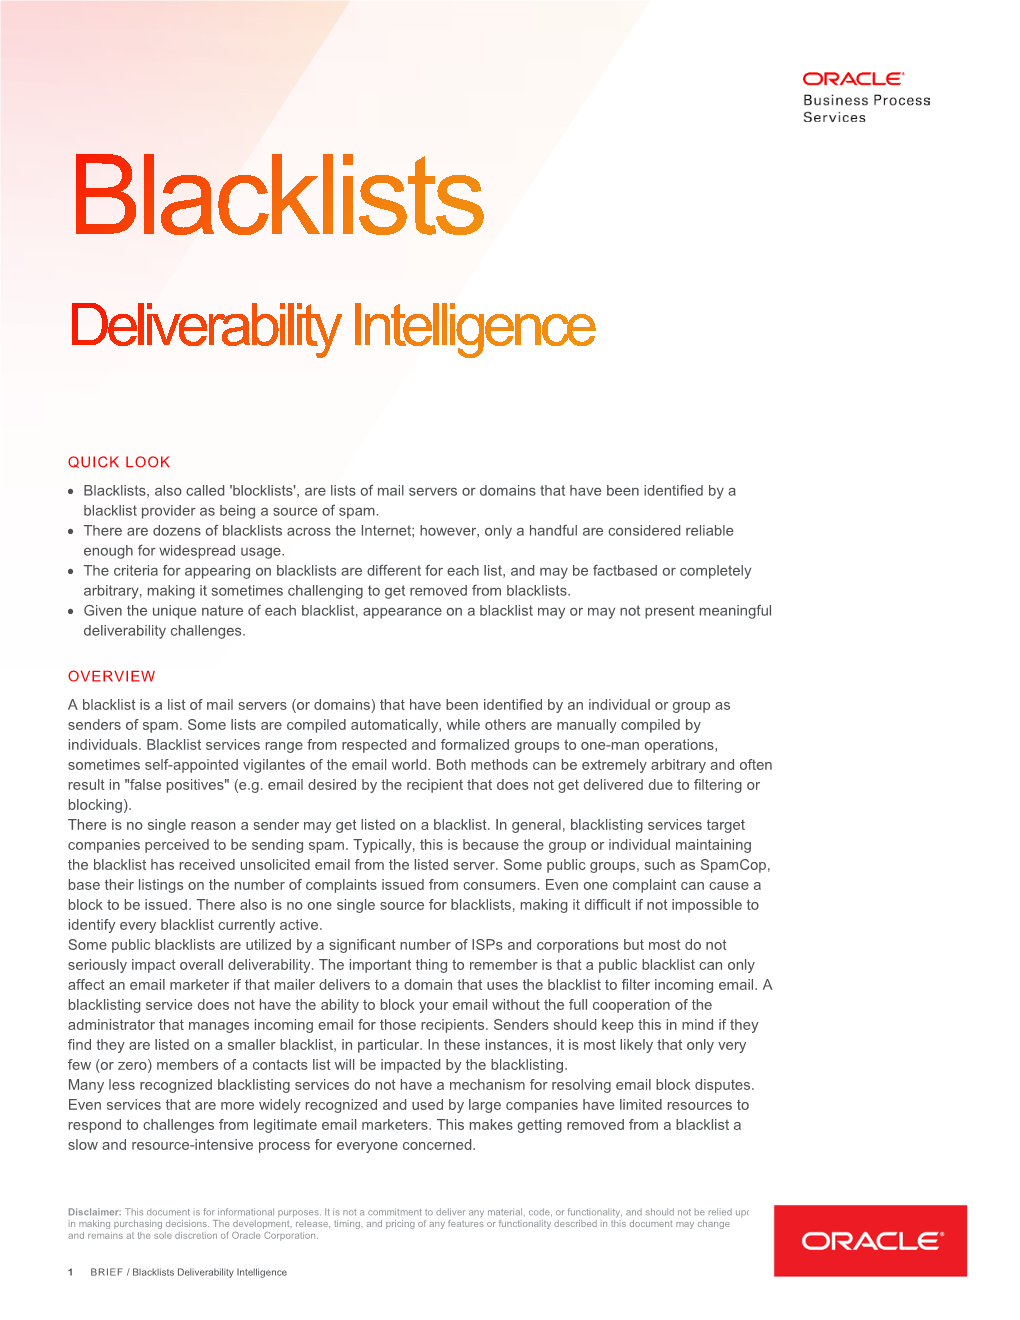 QUICK LOOK • Blacklists, Also Called 'Blocklists', Are Lists of Mail Servers Or Domains That Have Been Identified by a Blacklist Provider As Being a Source of Spam